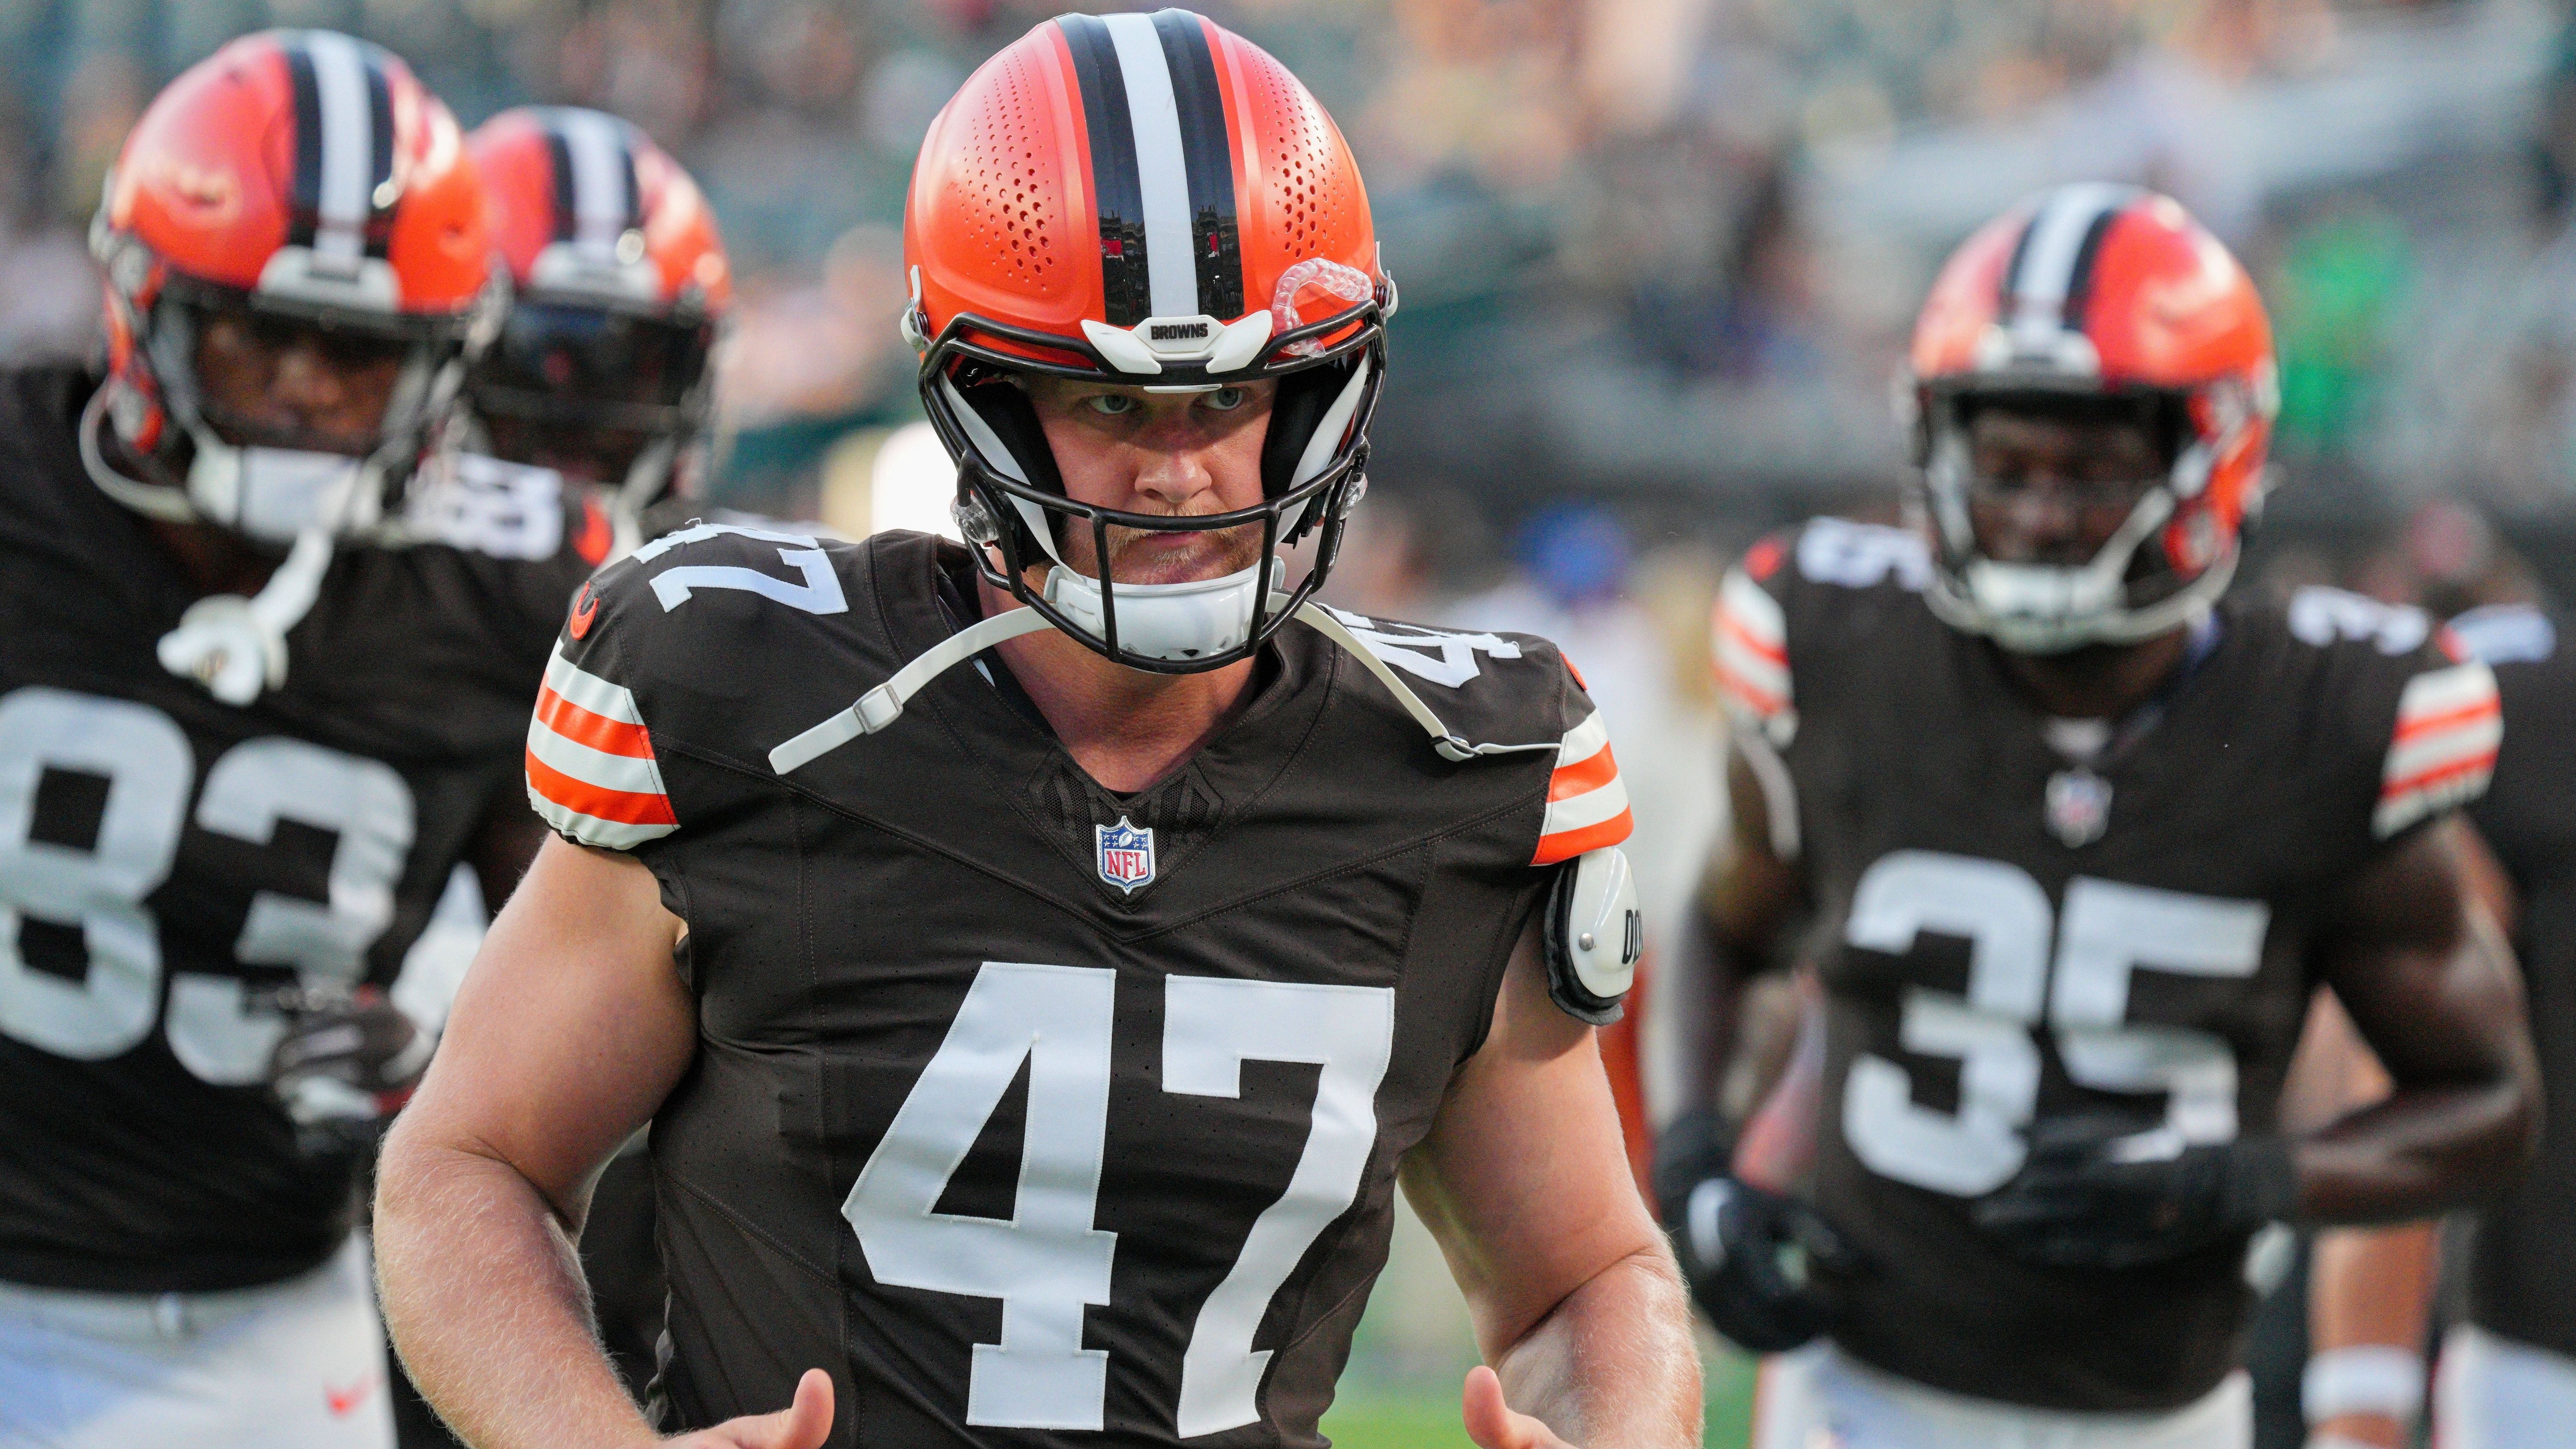 <strong>Cleveland Browns: Charley Hughlett<br></strong>Alter: 33 Jahre, 10 Monate und 25 Tage<br>Geburtsdatum: 16. Mai 1990<br>Position: Long Snapper